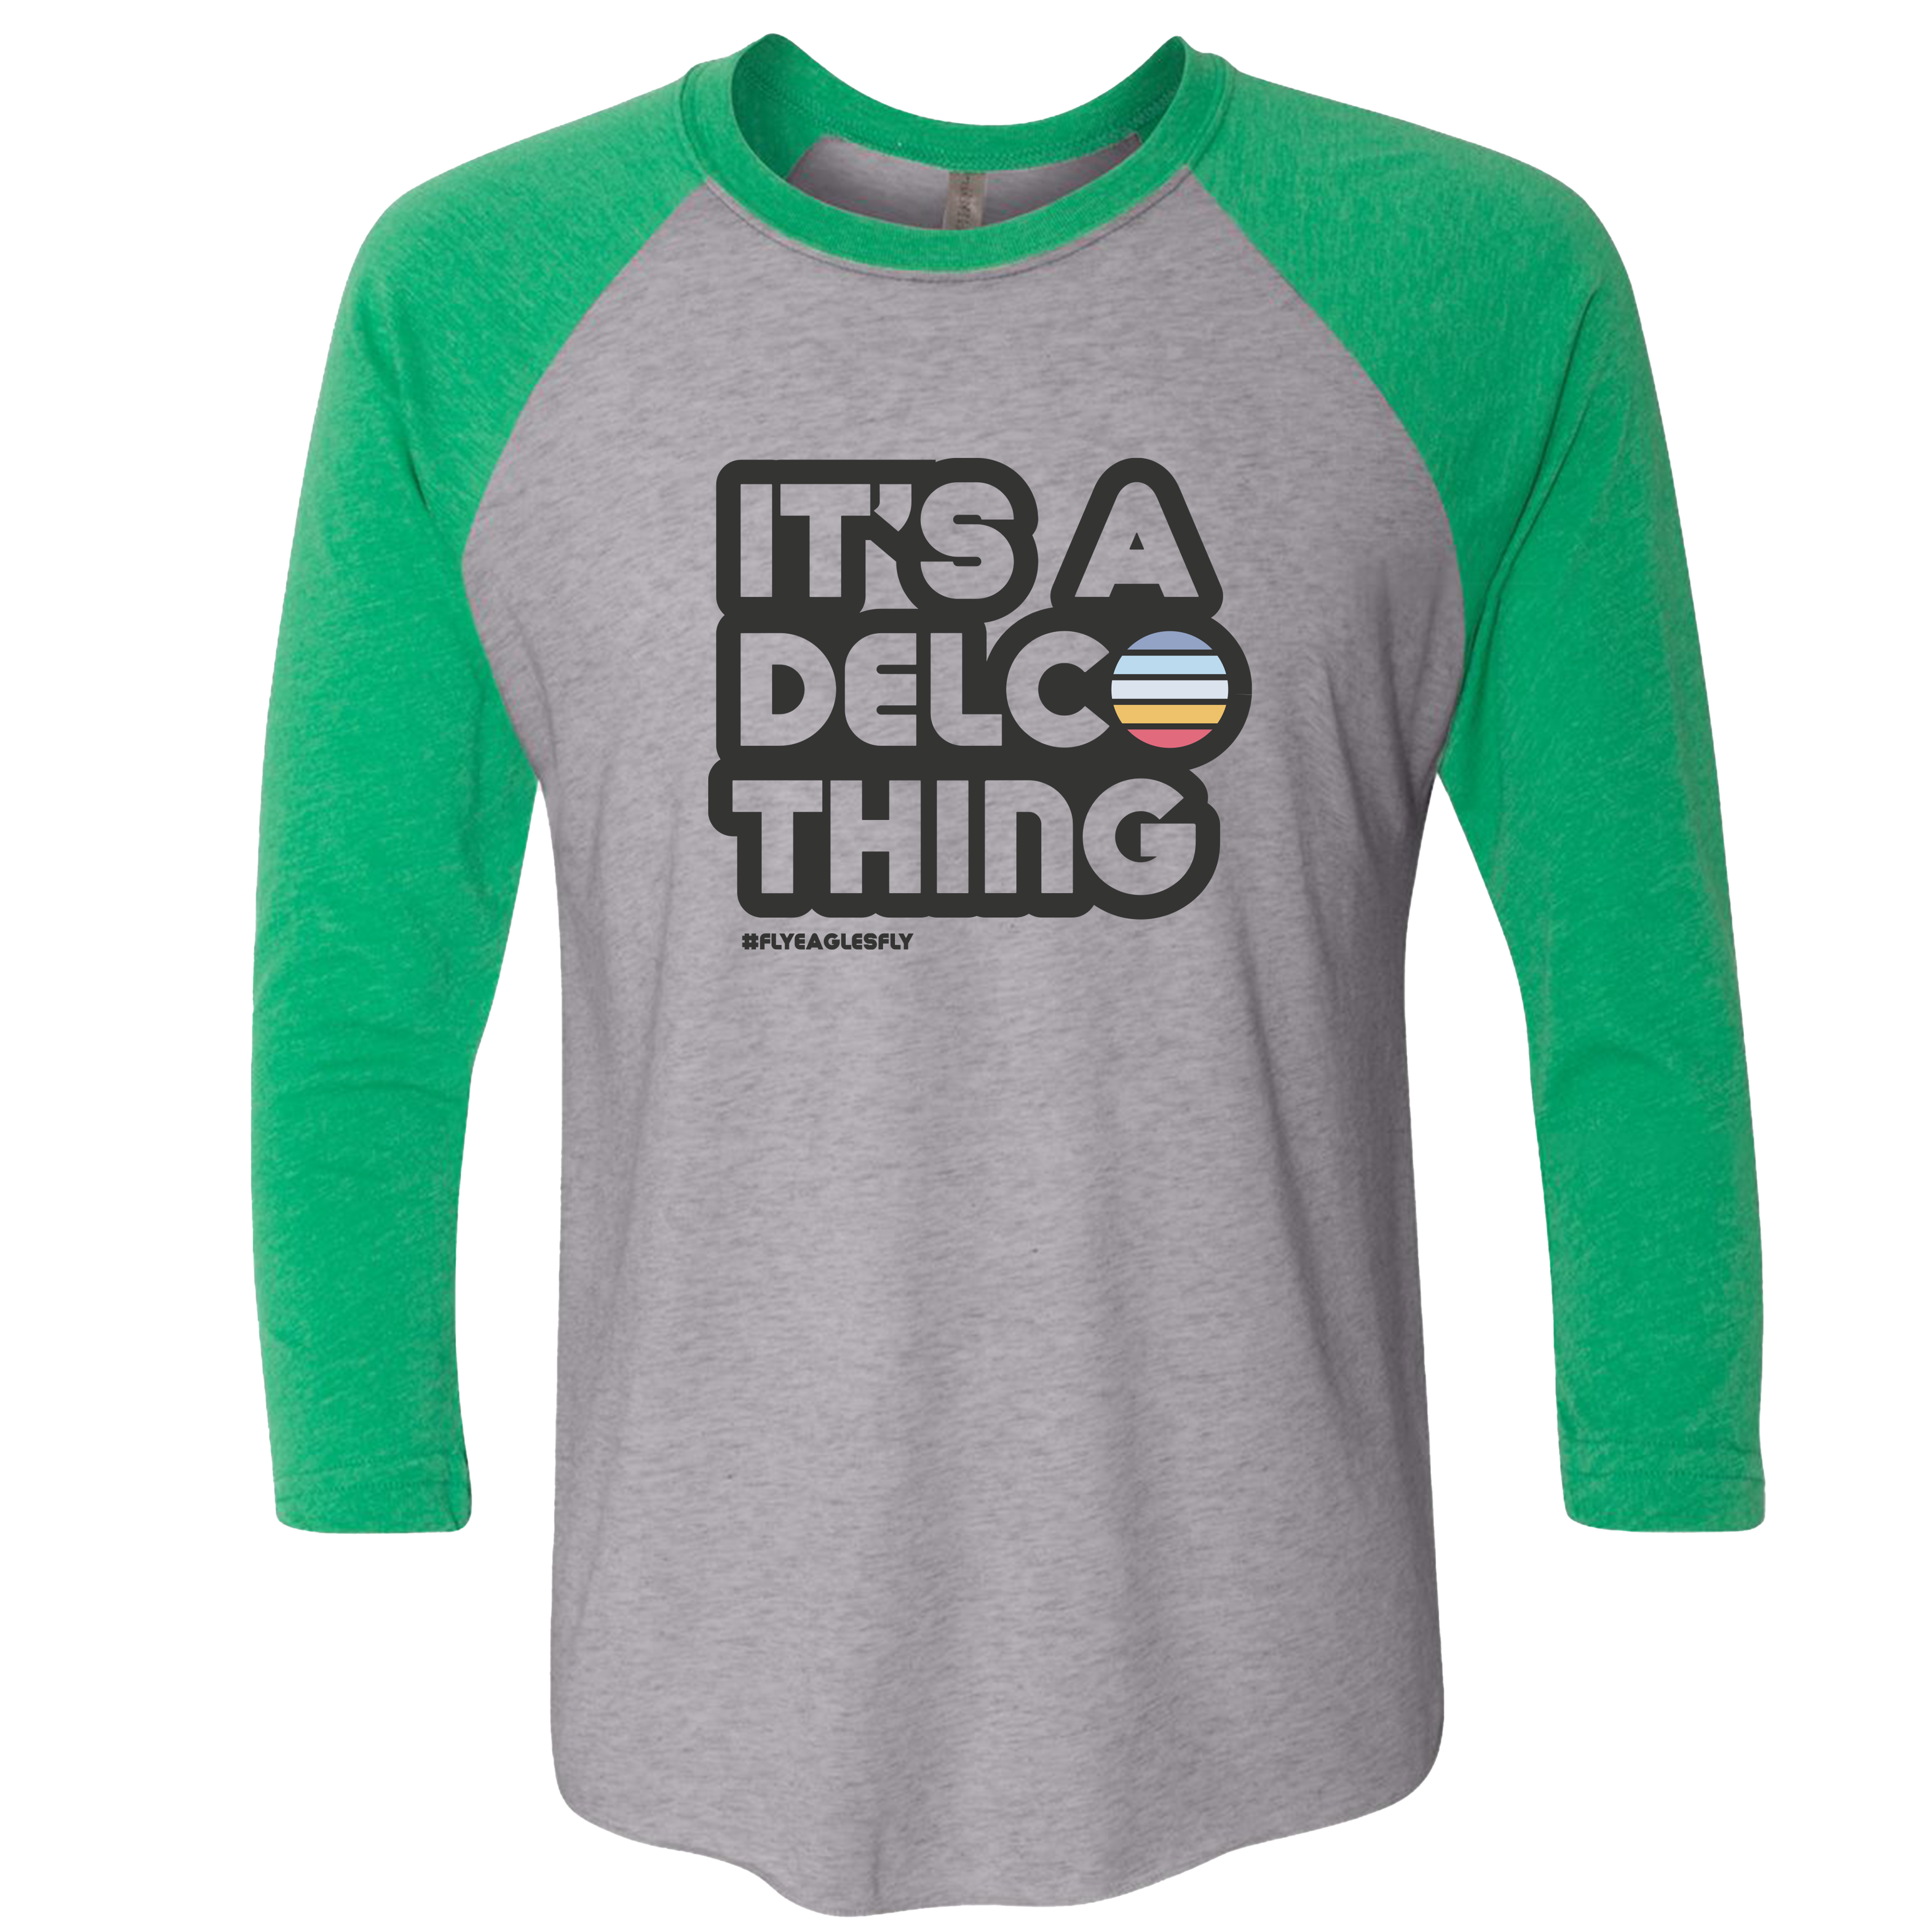 It's a DELCO Thing- Adult Baseball Tee